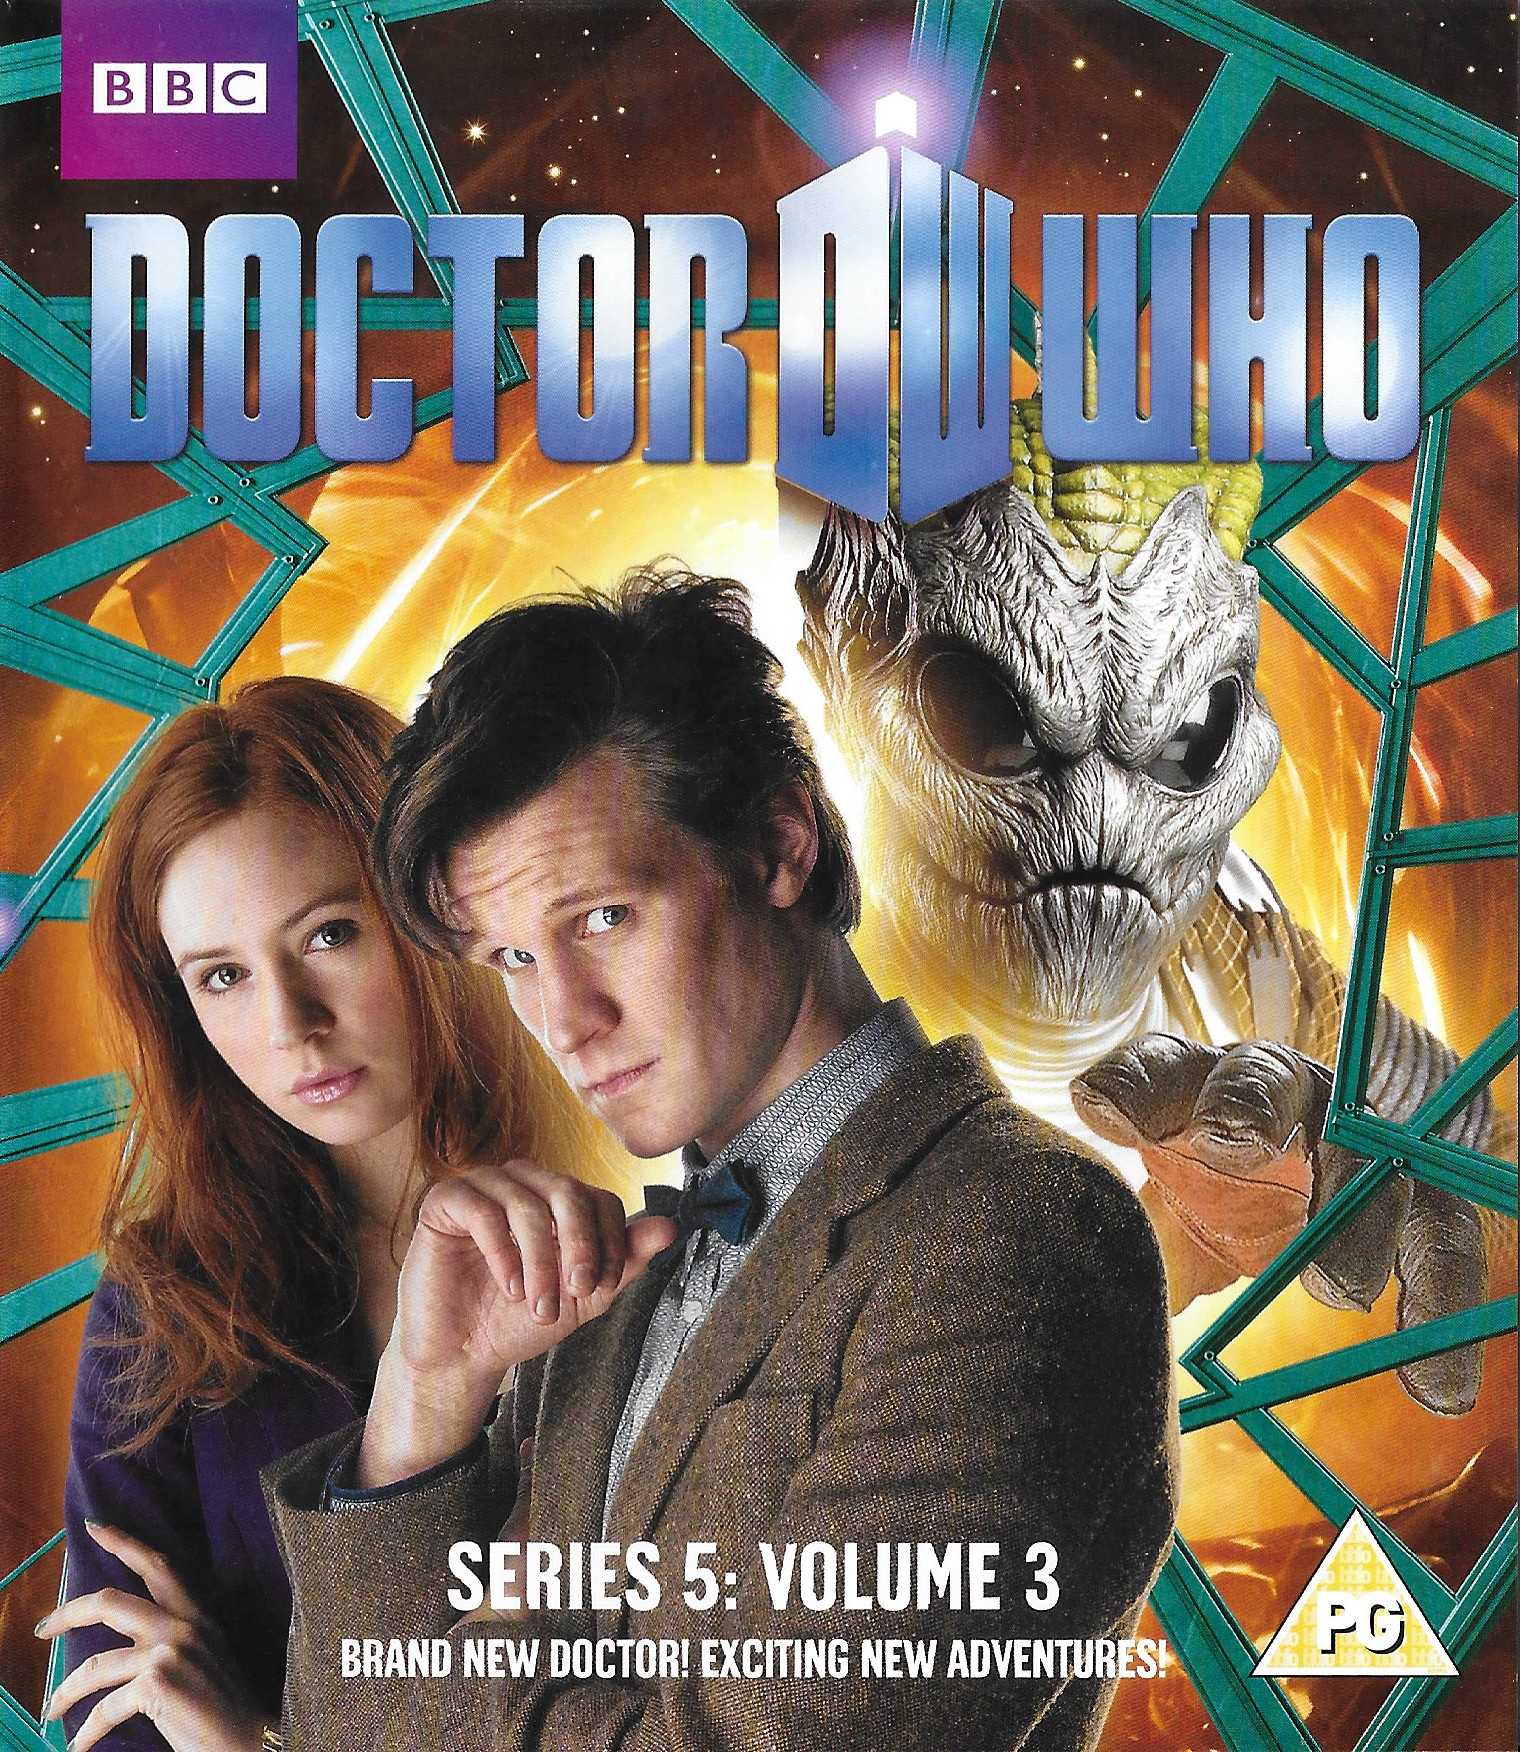 Picture of Doctor Who - Series 5, volume 3 by artist Simon Nye / Chris Chibnall from the BBC blu-rays - Records and Tapes library